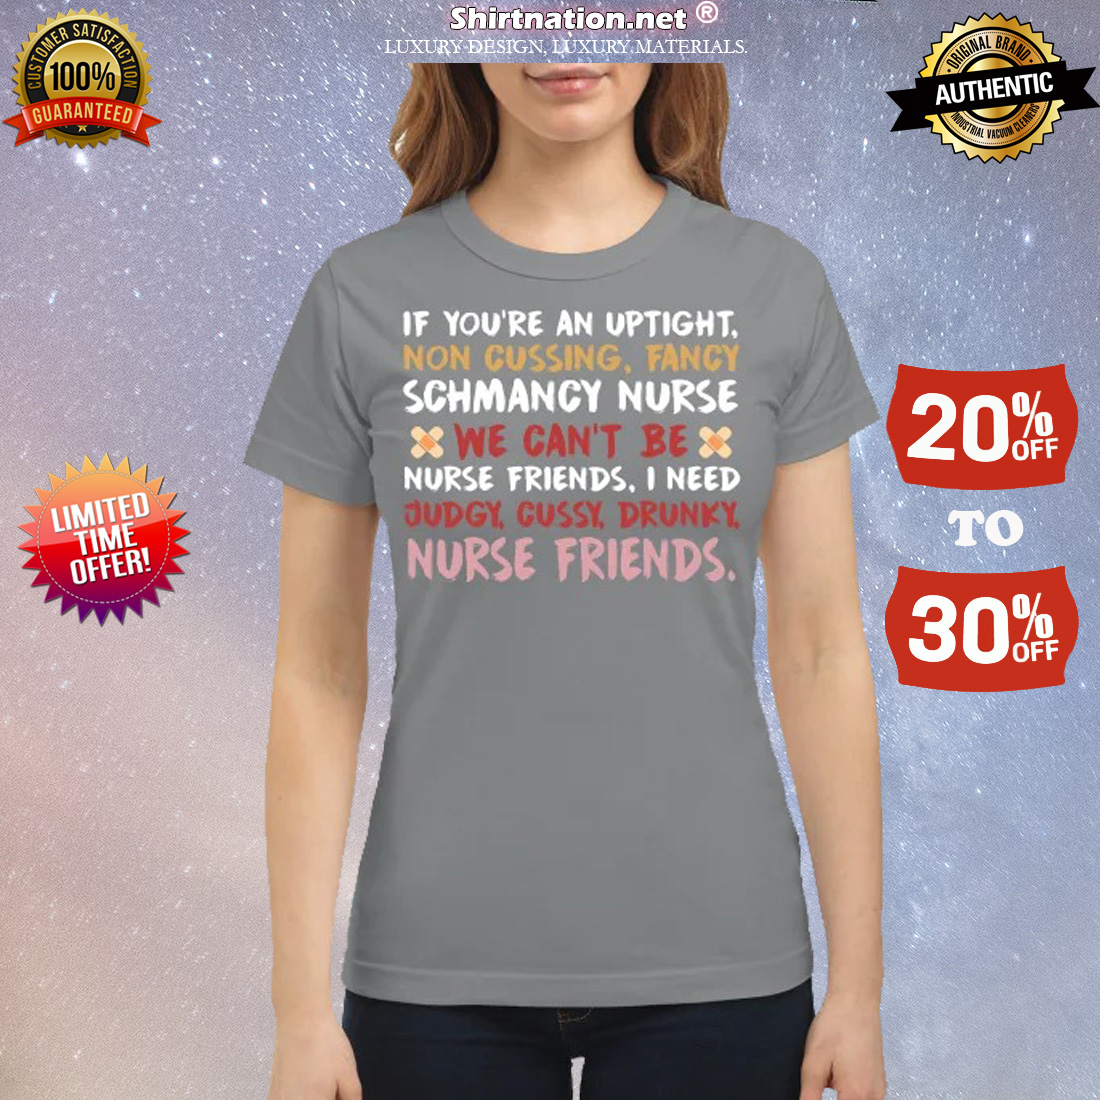 If you are an uptight non cussing fancy schmancy nurse we can't be nurse friends judgy cussy drunky classic shirt